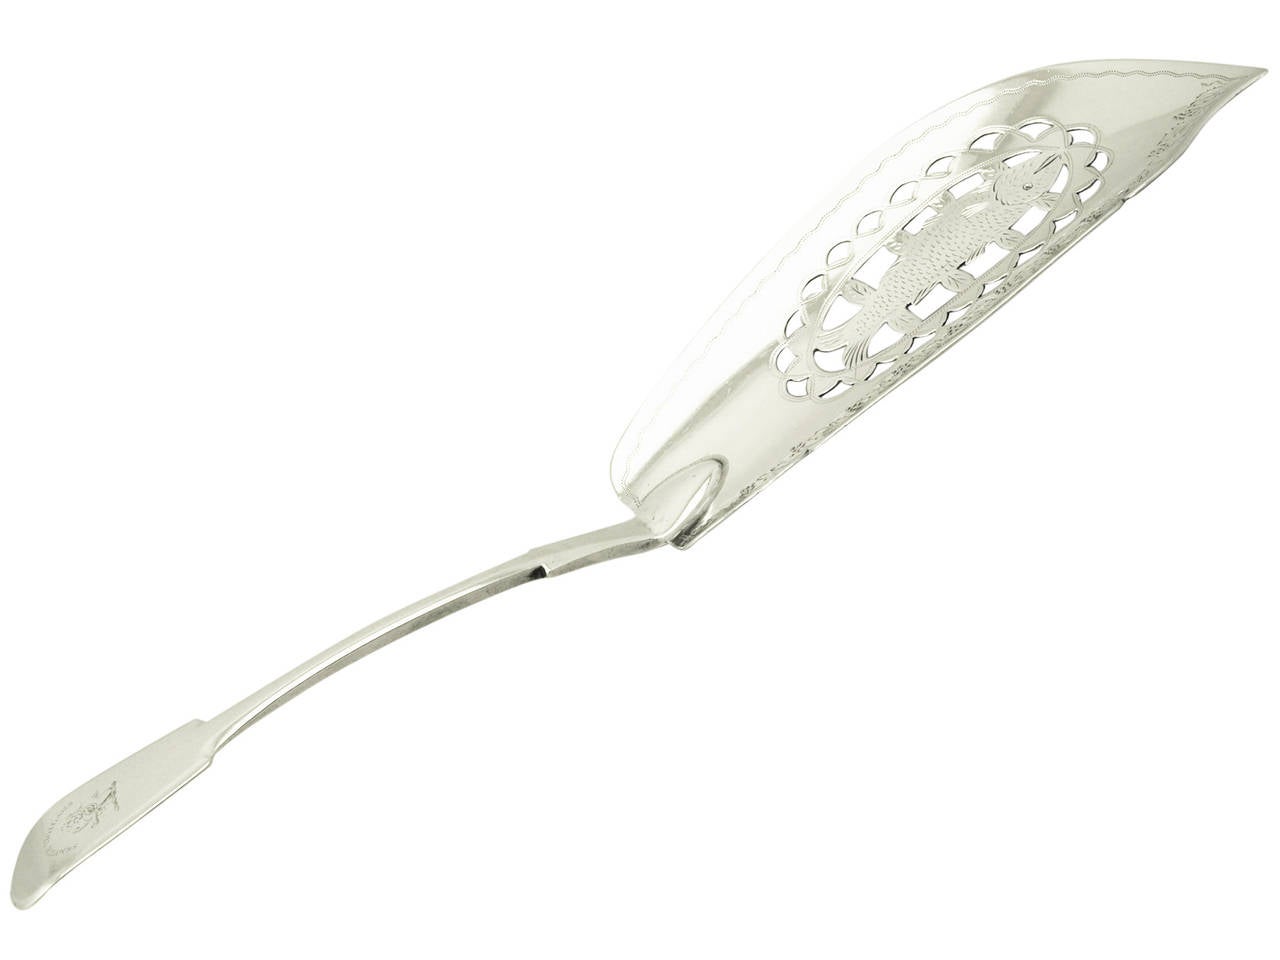 A fine and impressive antique Scottish sterling silver Fiddle pattern fish slice/server made by William Jamieson in Aberdeen; an addition to our silver flatware collection

This fine antique Scottish sterling silver fish slice/server has an